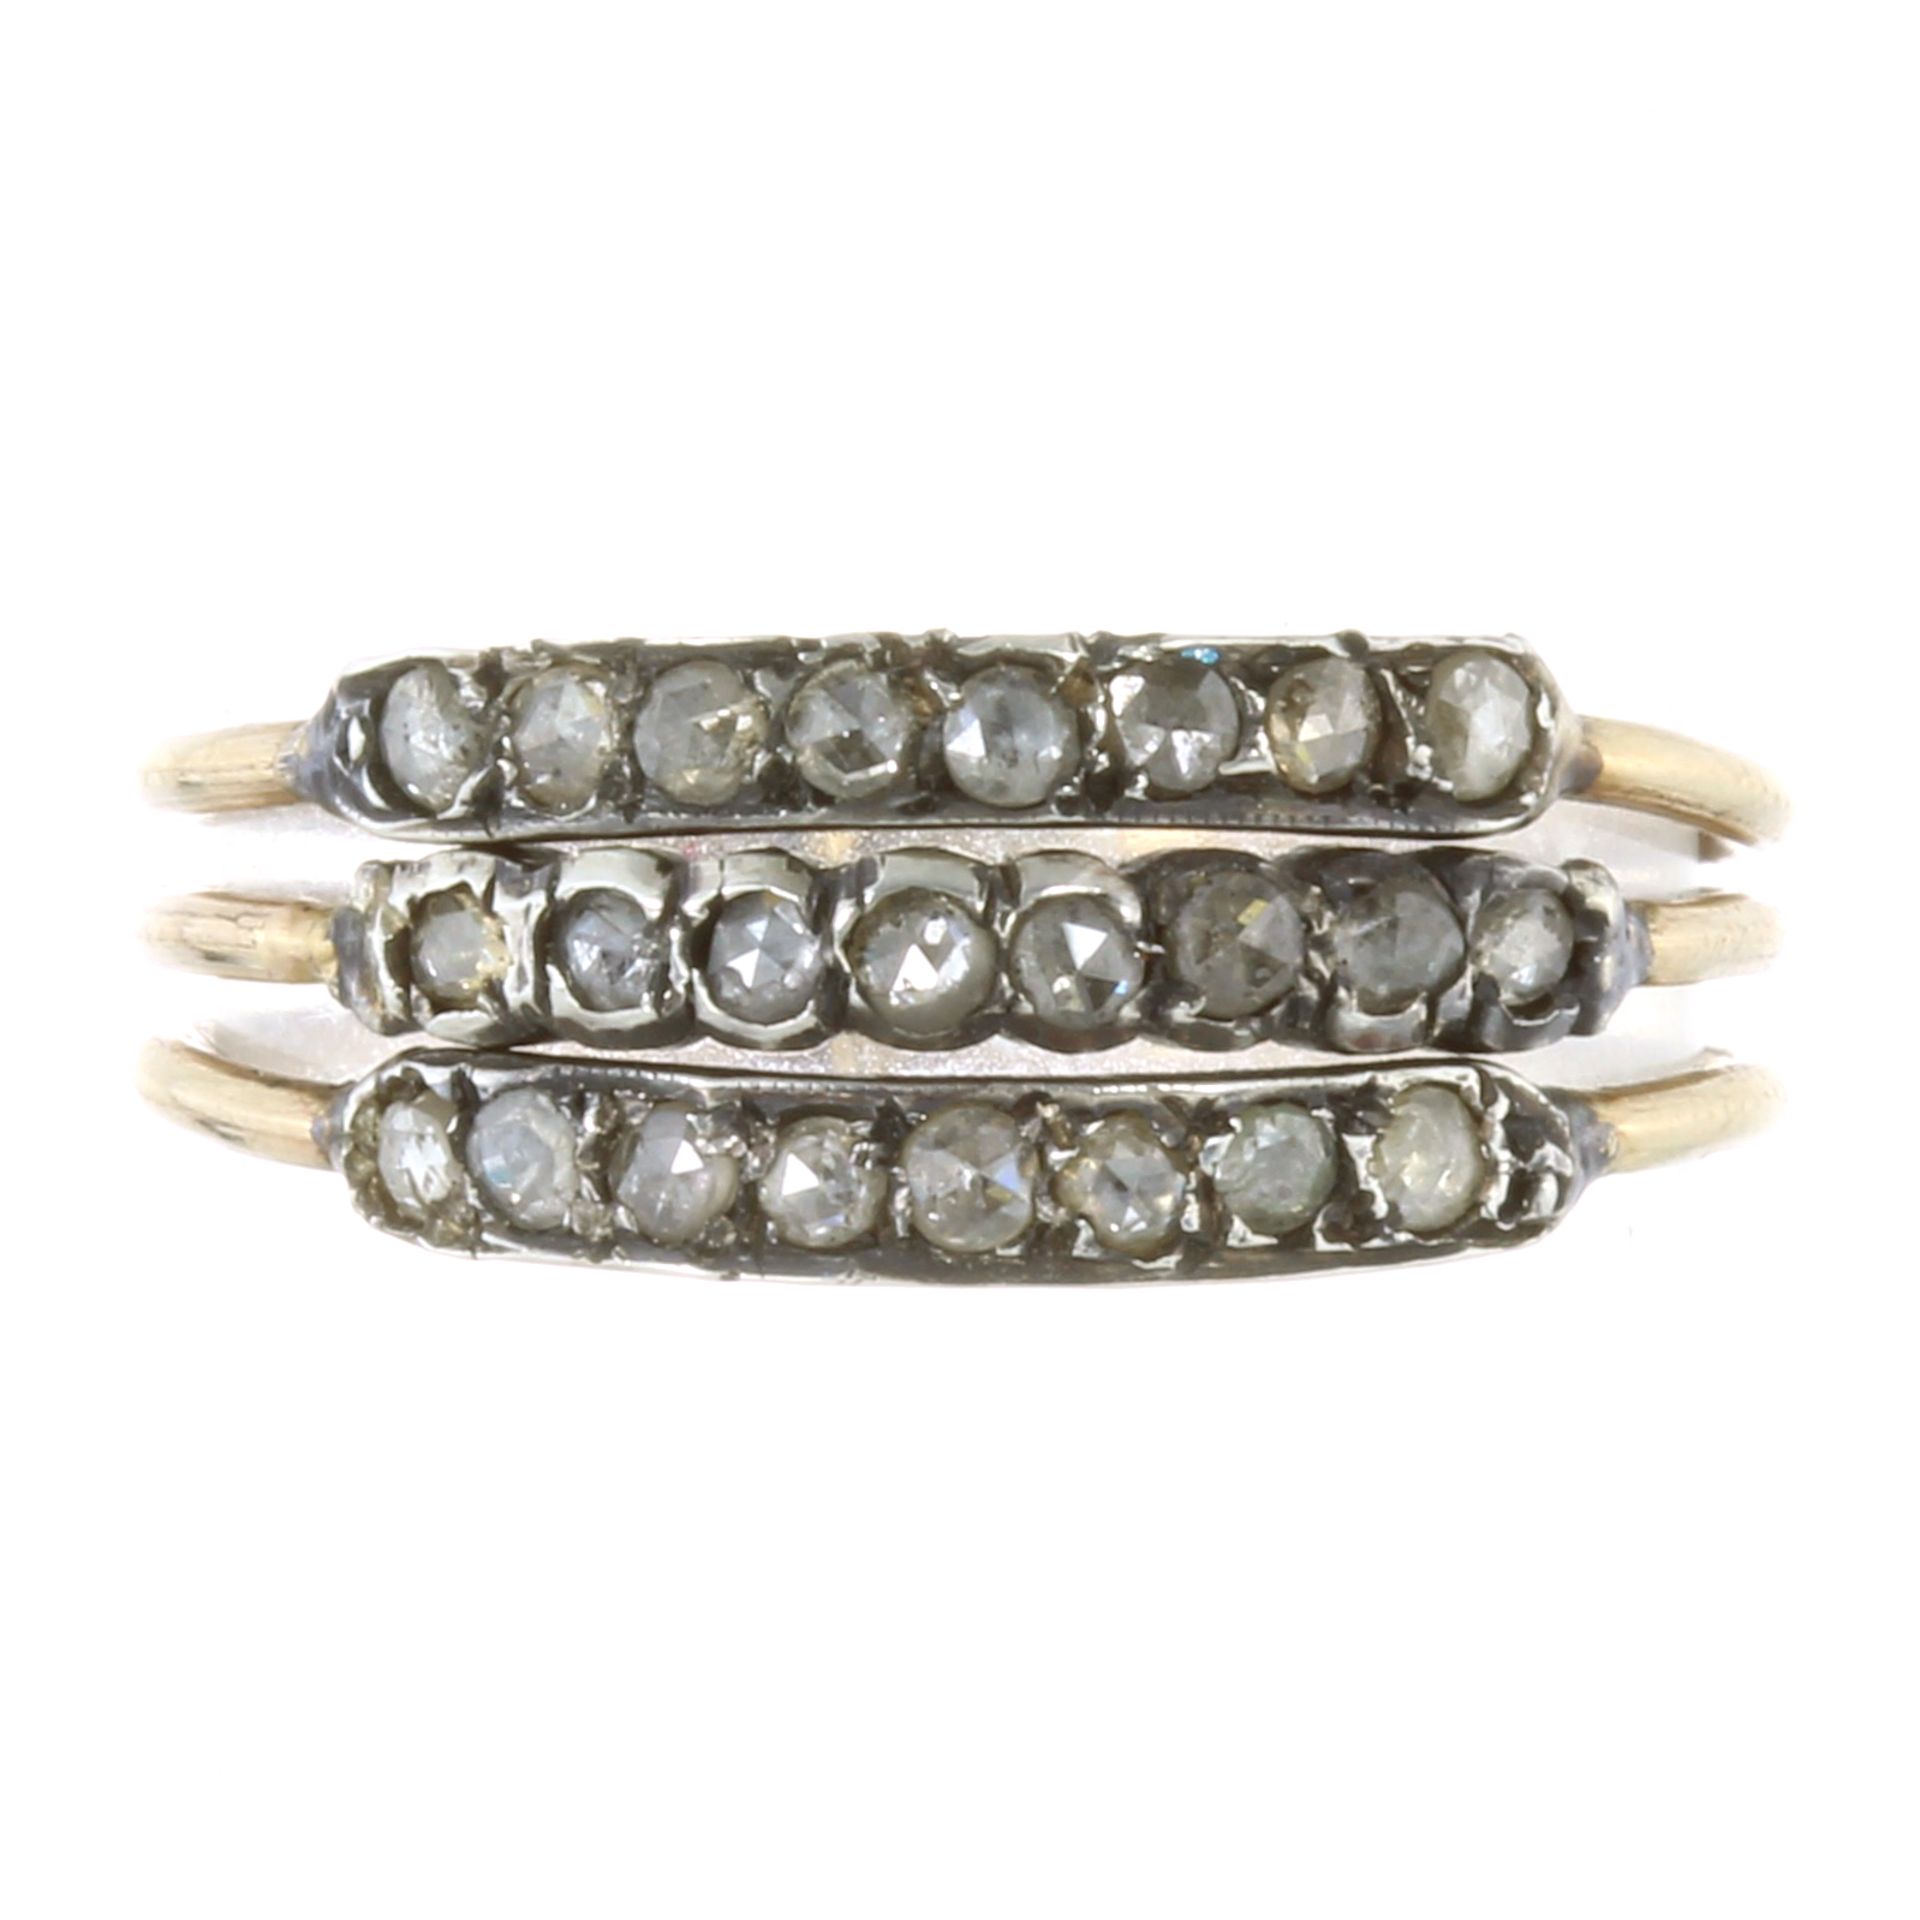 AN ANTIQUE THREE ROW DIAMOND RING, EARLY 19TH CENTURY in high carat yellow gold and silver, designed